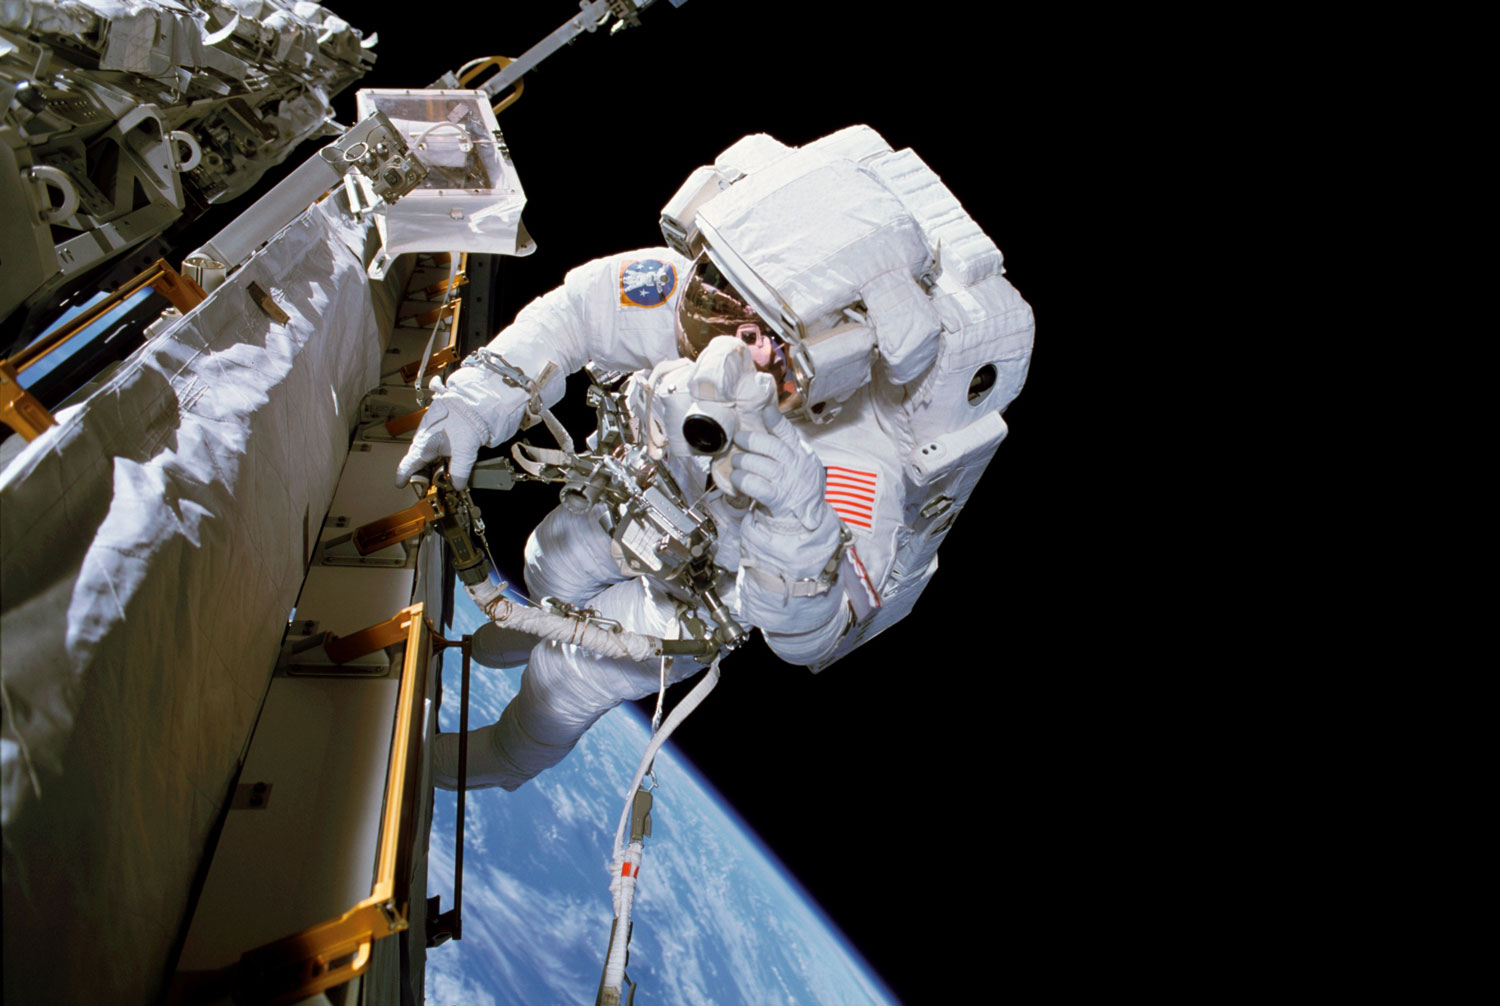 Astronaut doing space walk outside the ISS